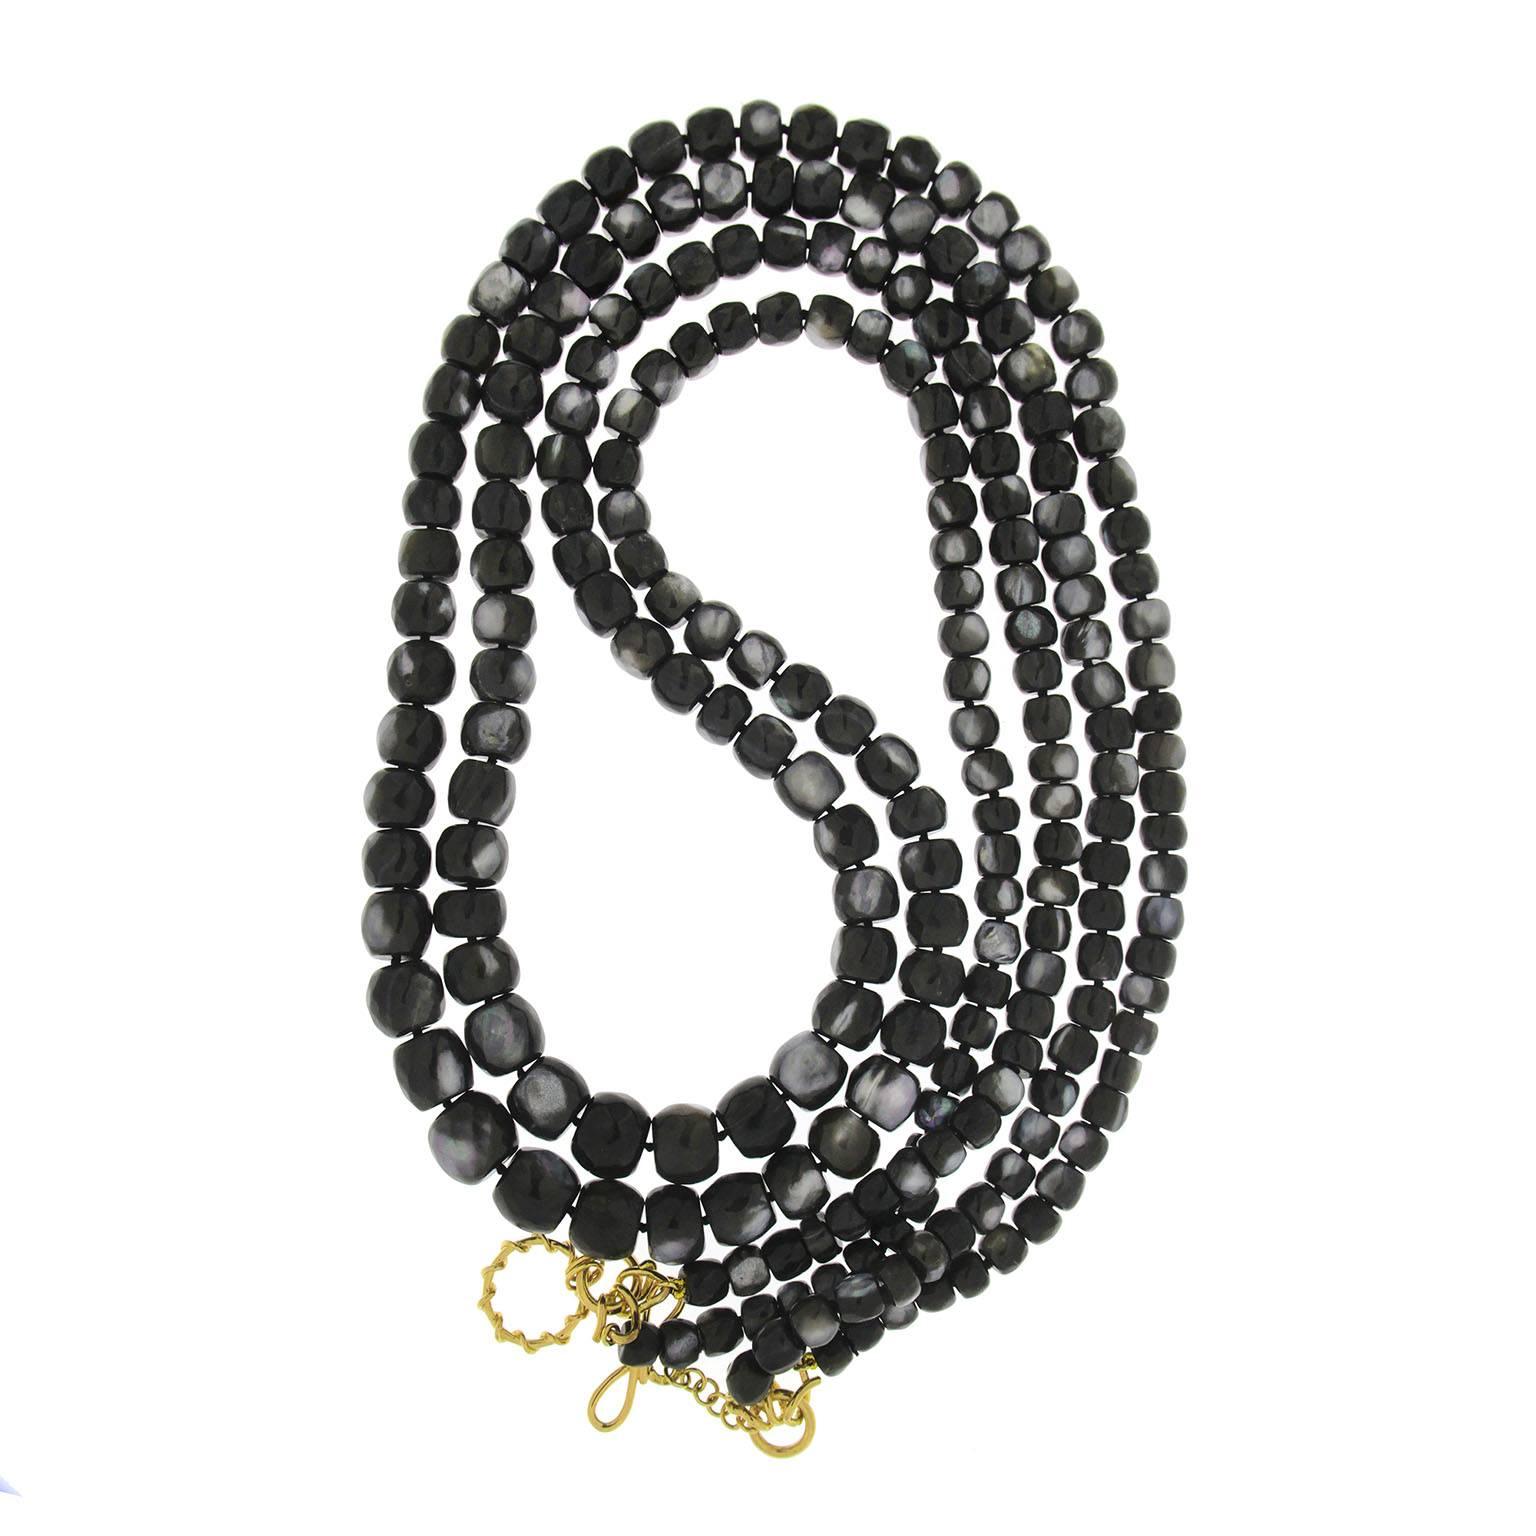 Valentin Magro Multi-Strand Barrel Shaped Faceted Black Mother of Pearl Necklace has a mottled appearance. The main hue on the mother of pearl is black, though grey appears here and there, adding variety. The jewels are carved into barrel shaped